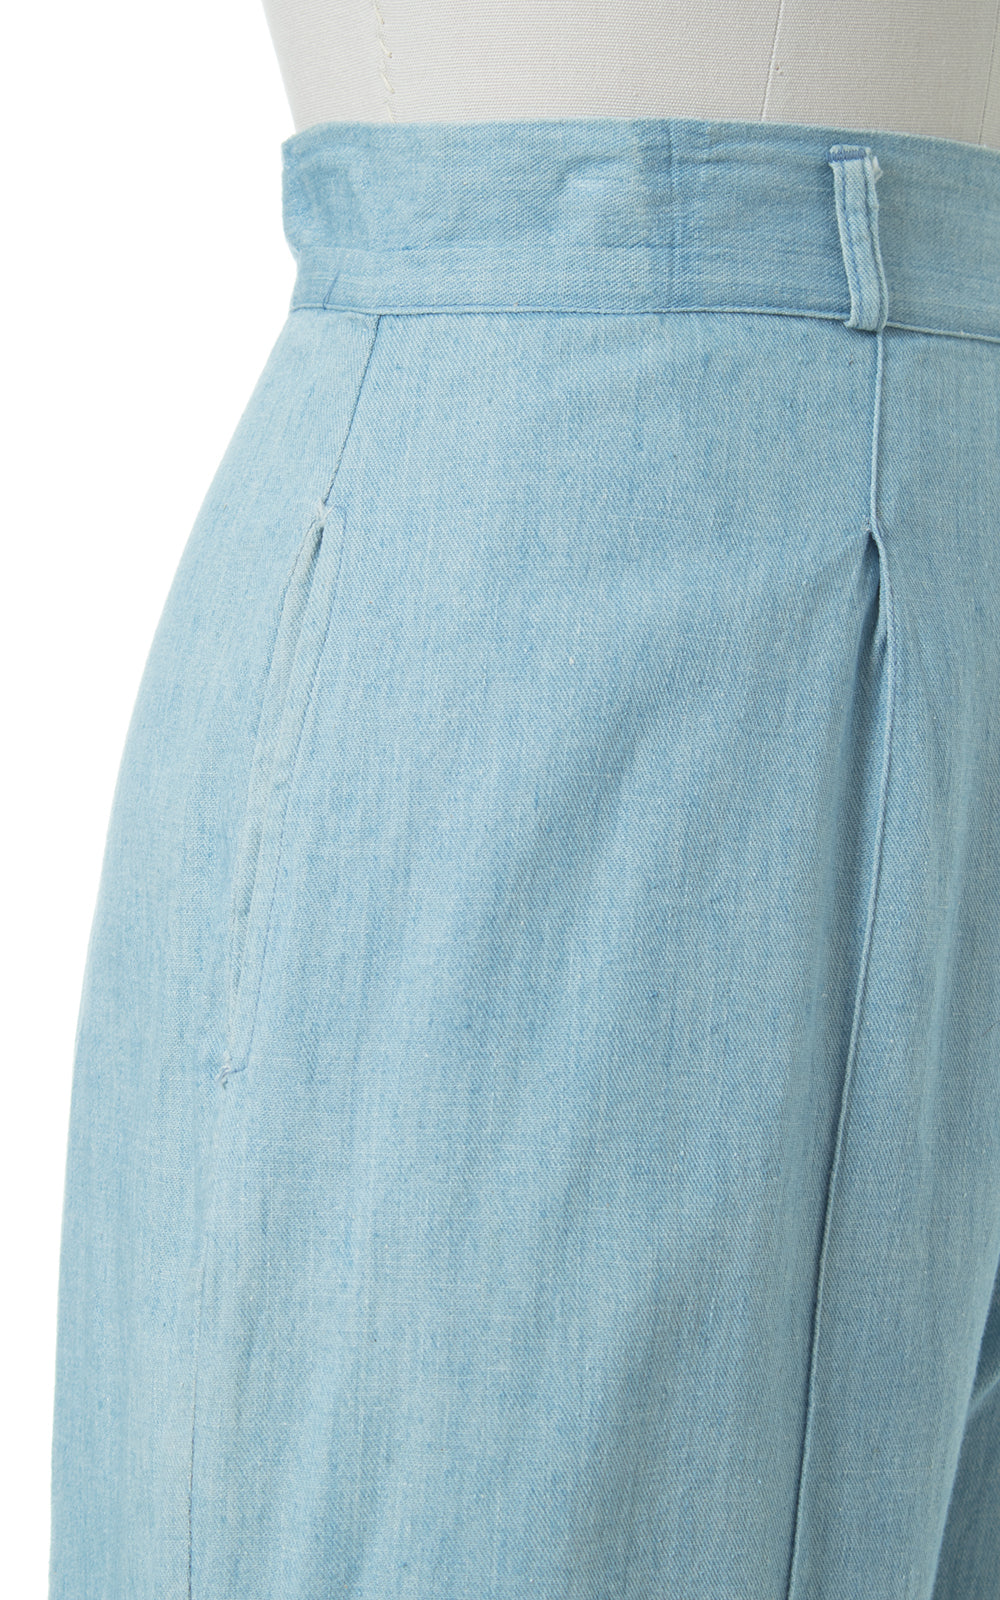 1950s Chambray Wide Leg Cropped Jeans